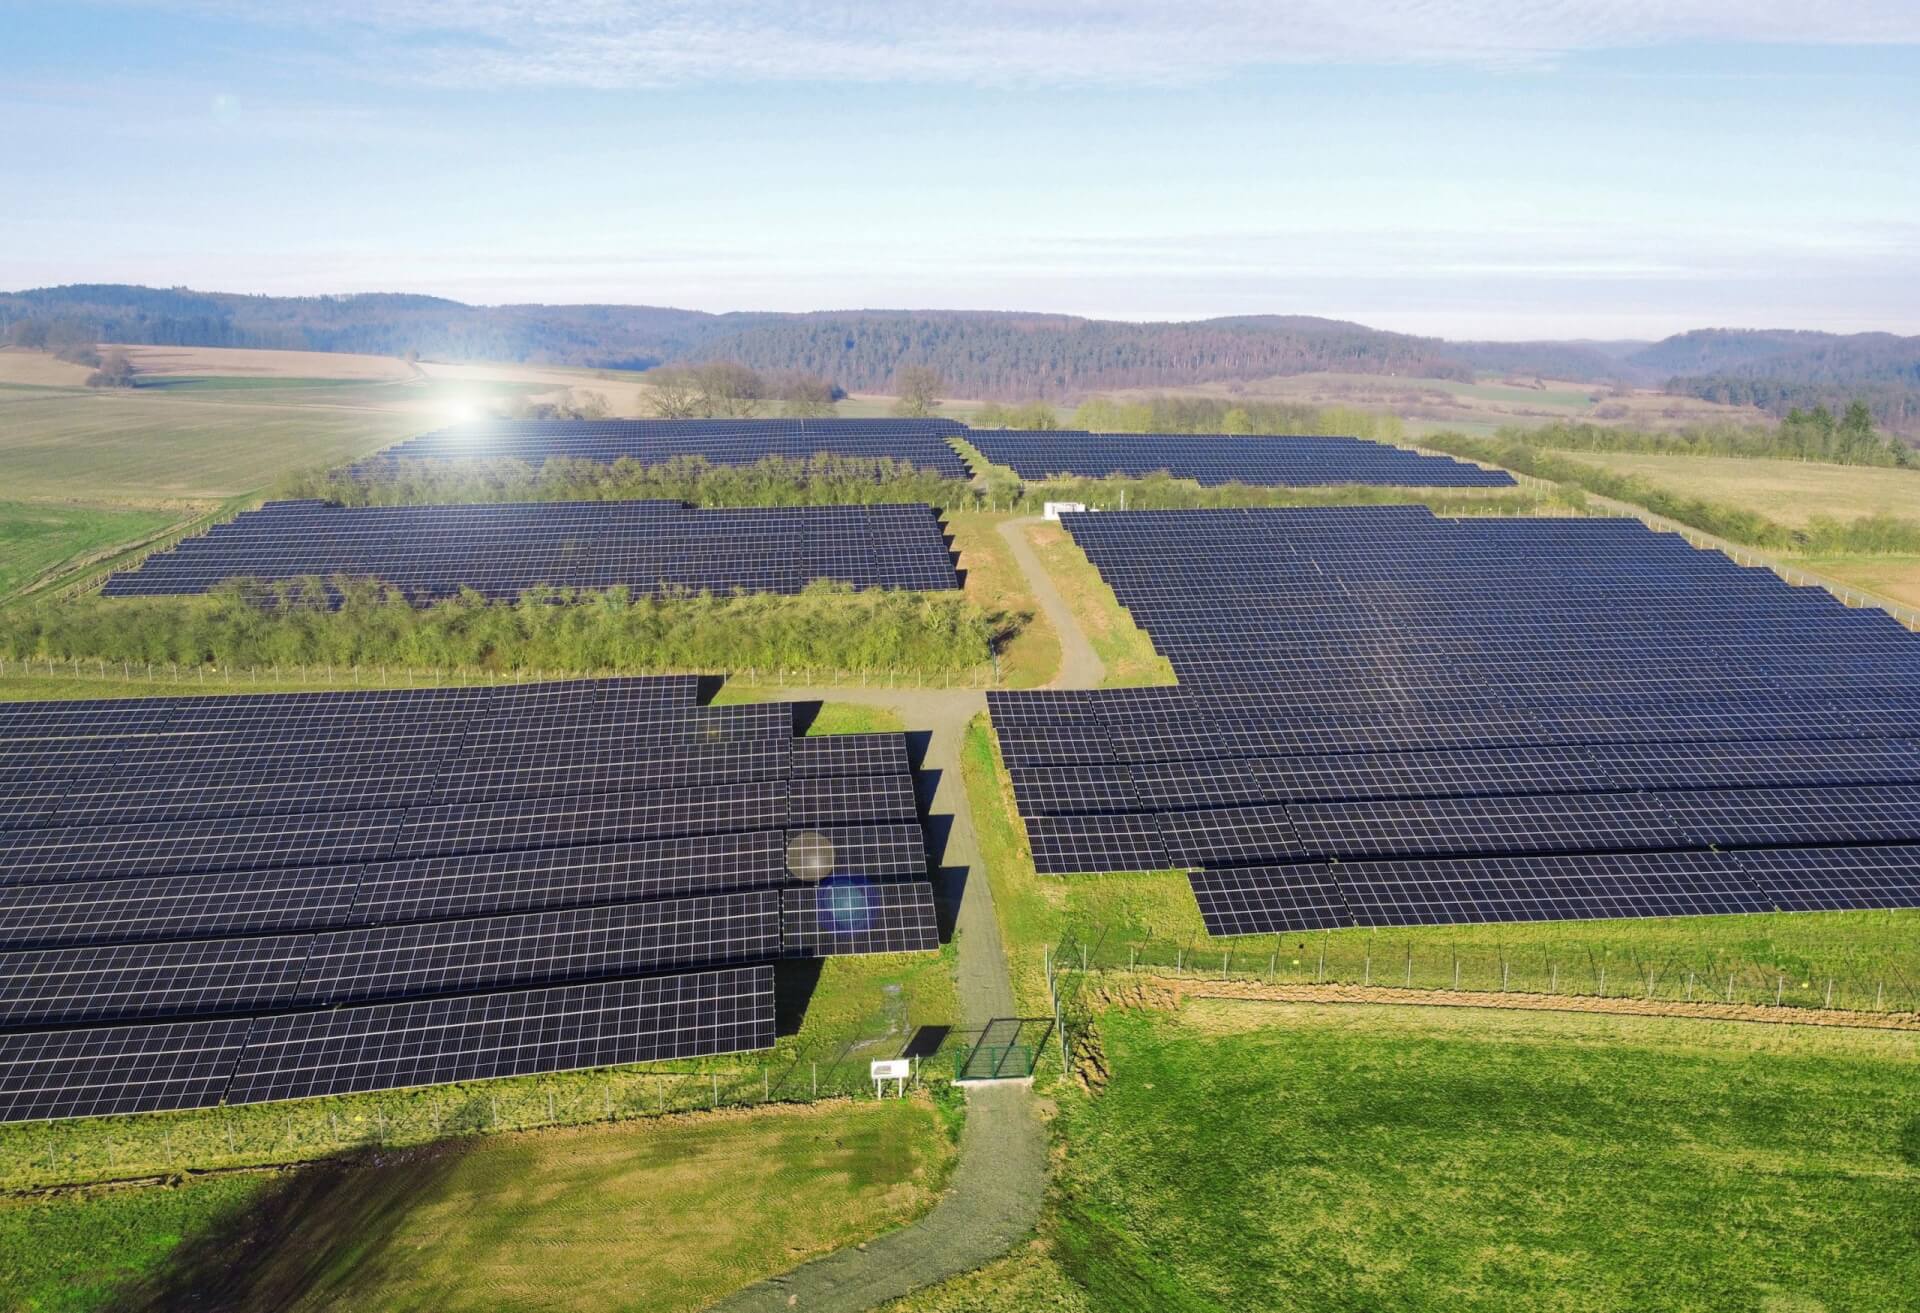 Reddehausen solar farm shown above, the sun is reflected in the modules